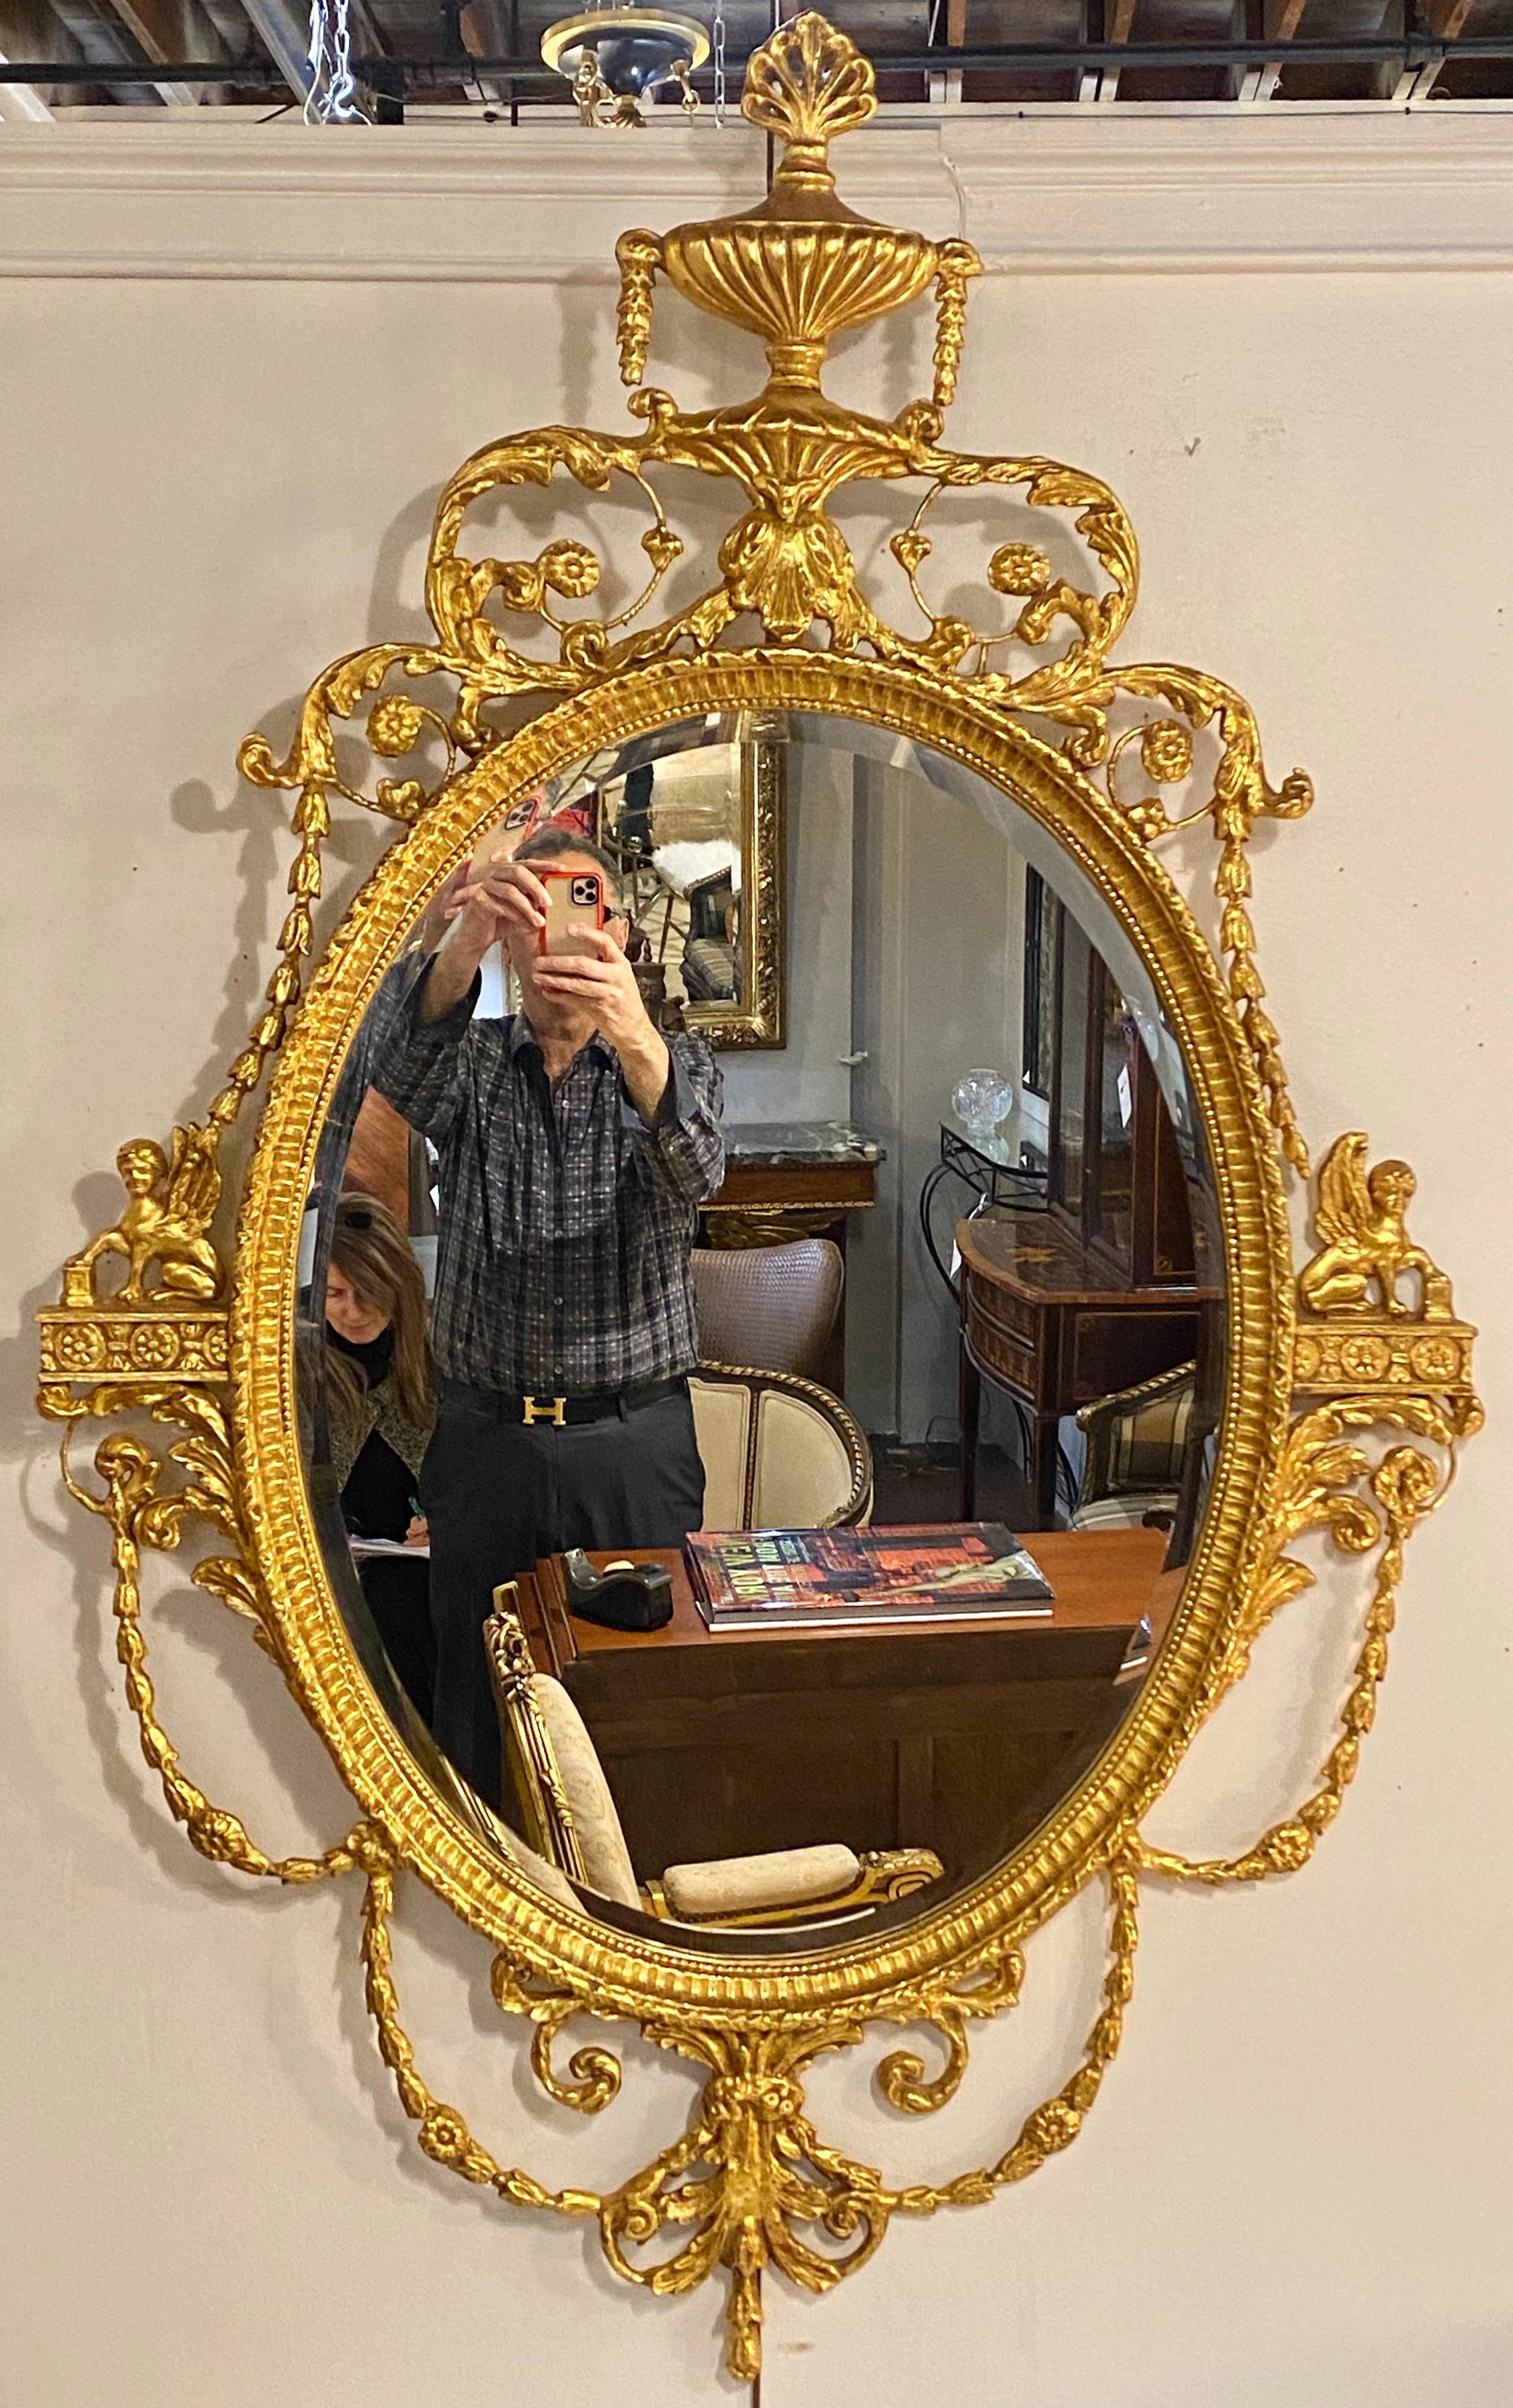 Pair of Freidman Brothers compatible sphinx gilt gold beveled oval wall mirrors. One is slightly brighter than the other not noticeable when spread apart. Can purchase only one if only one is required.
1/ES.